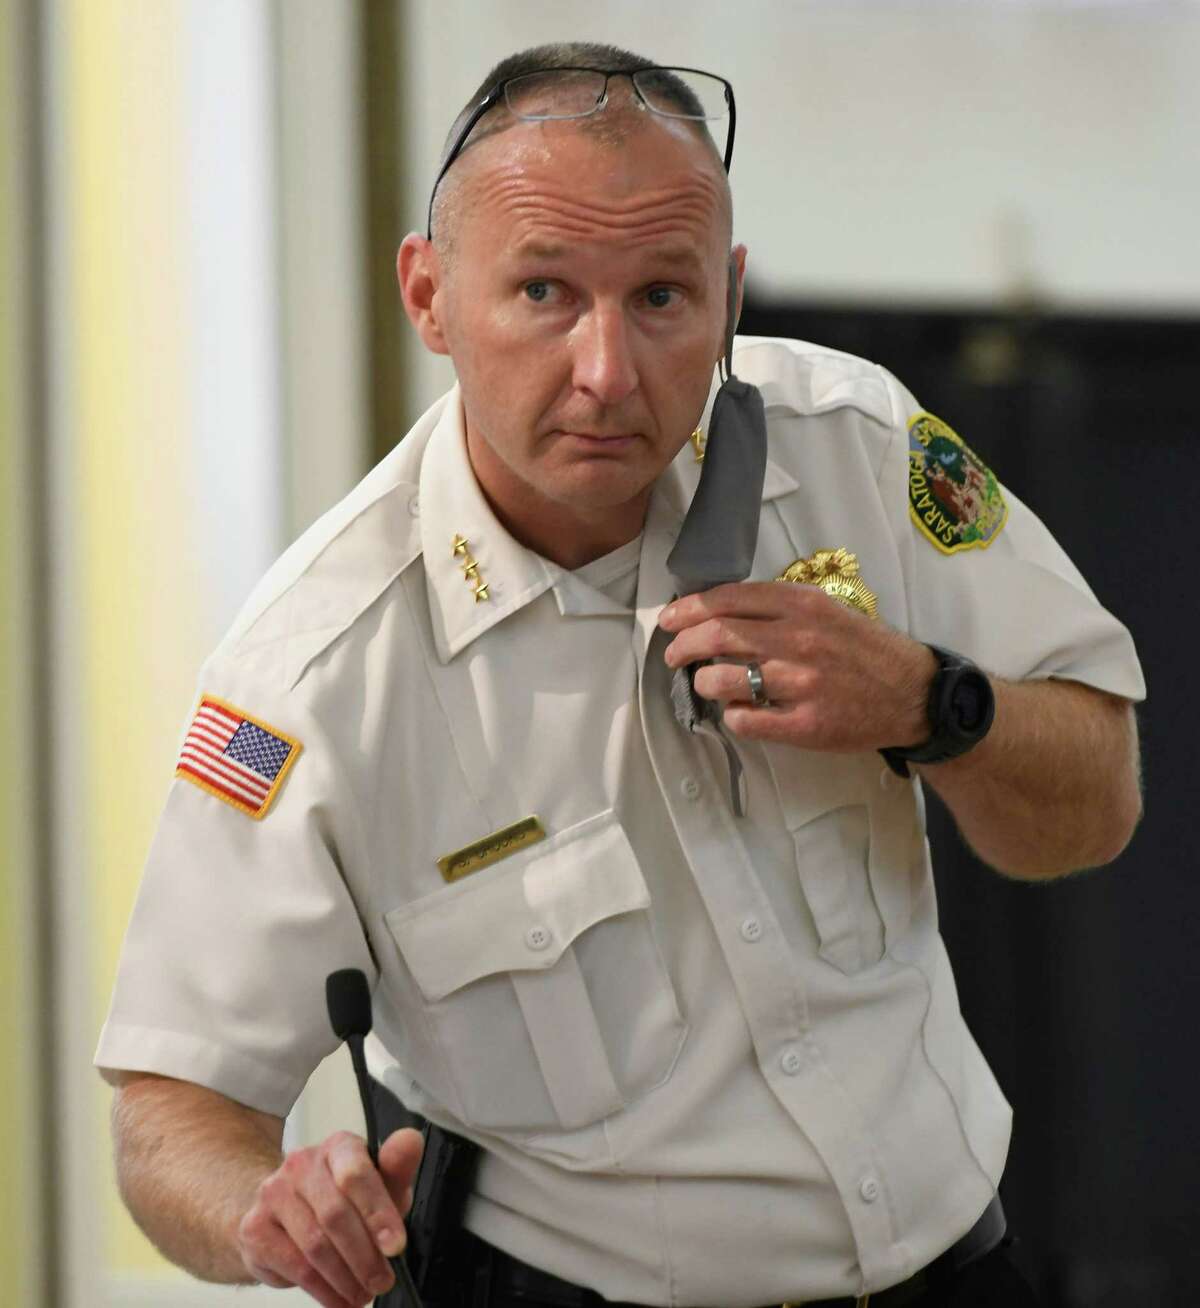 Saratoga Springs police chief Shane Crooks answers questions from a resident during the police task force meeting at the Canfield Casino building on Wednesday, Sept. 9, 2020, in Saratoga Springs. (Jenn March, Special to the Times Union)